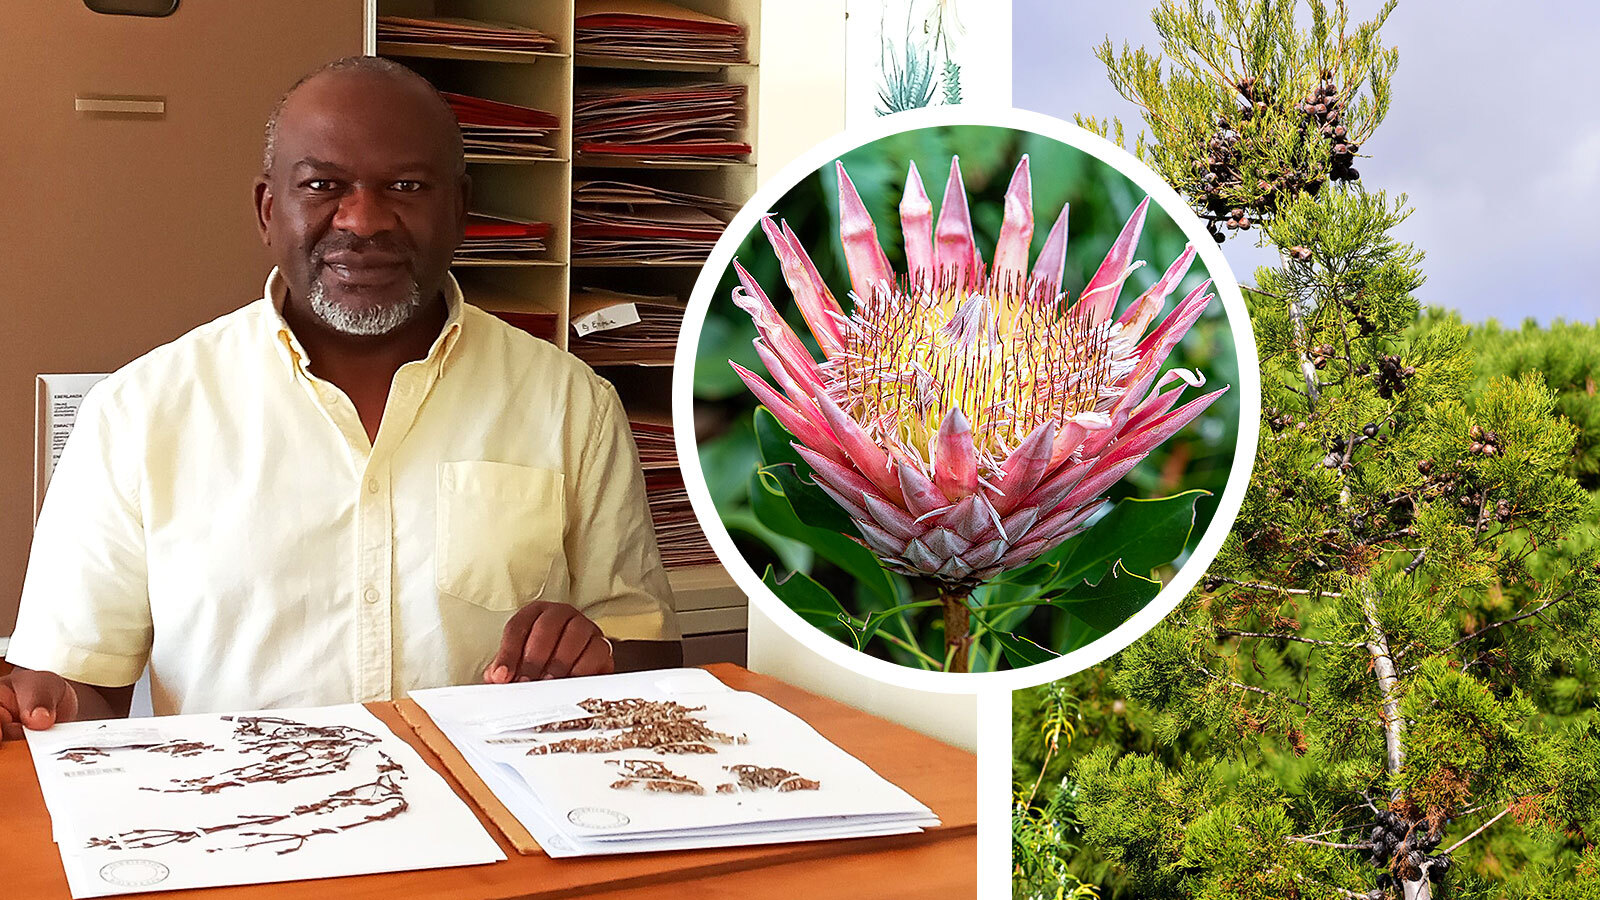 Professor Muthama Muasya said Kew herbarium had “historical baggage” dating to the age of empire when material was just taken